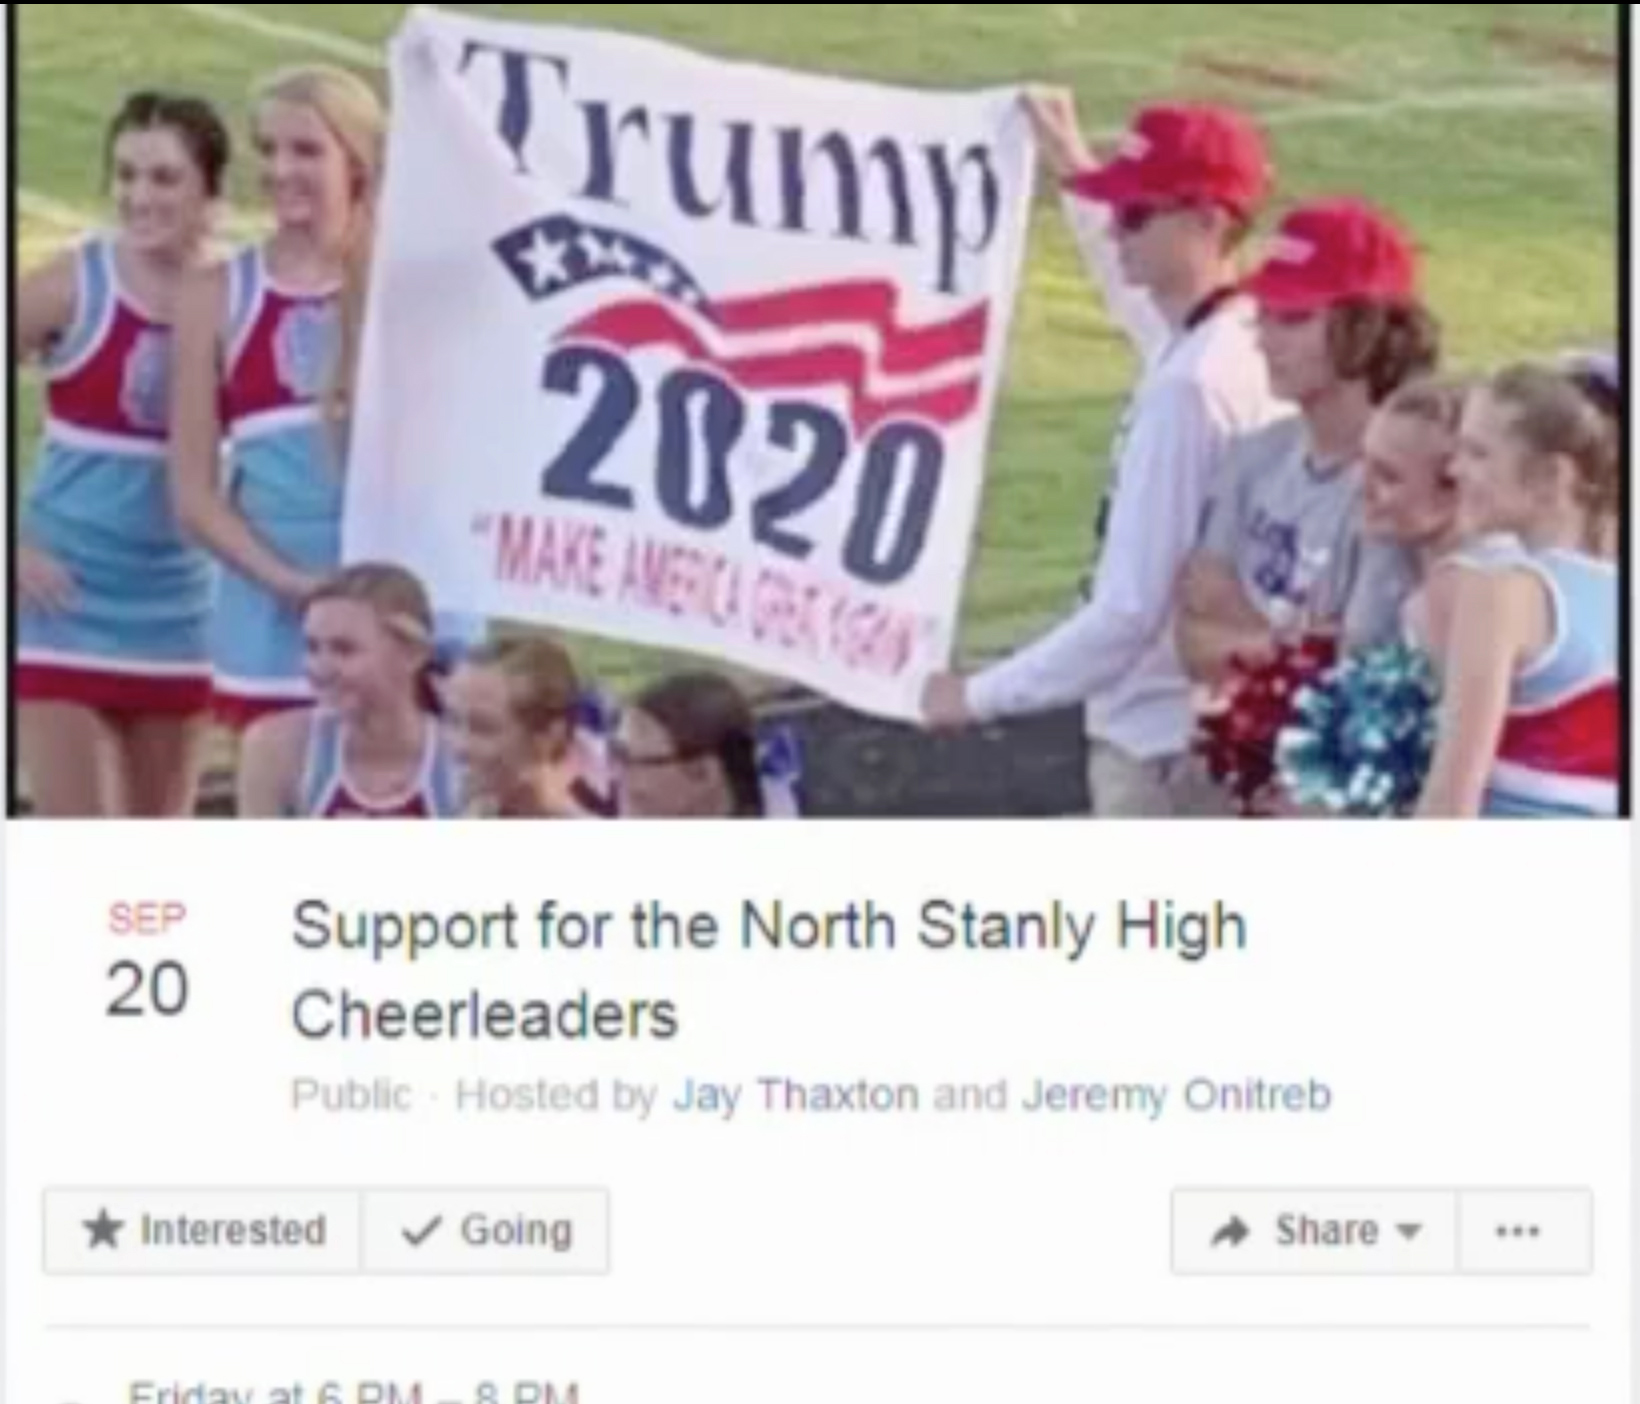 PHOTO: Residents came out to support the North Stanly High School cheerleaders after they were disciplined for posing with this sign.